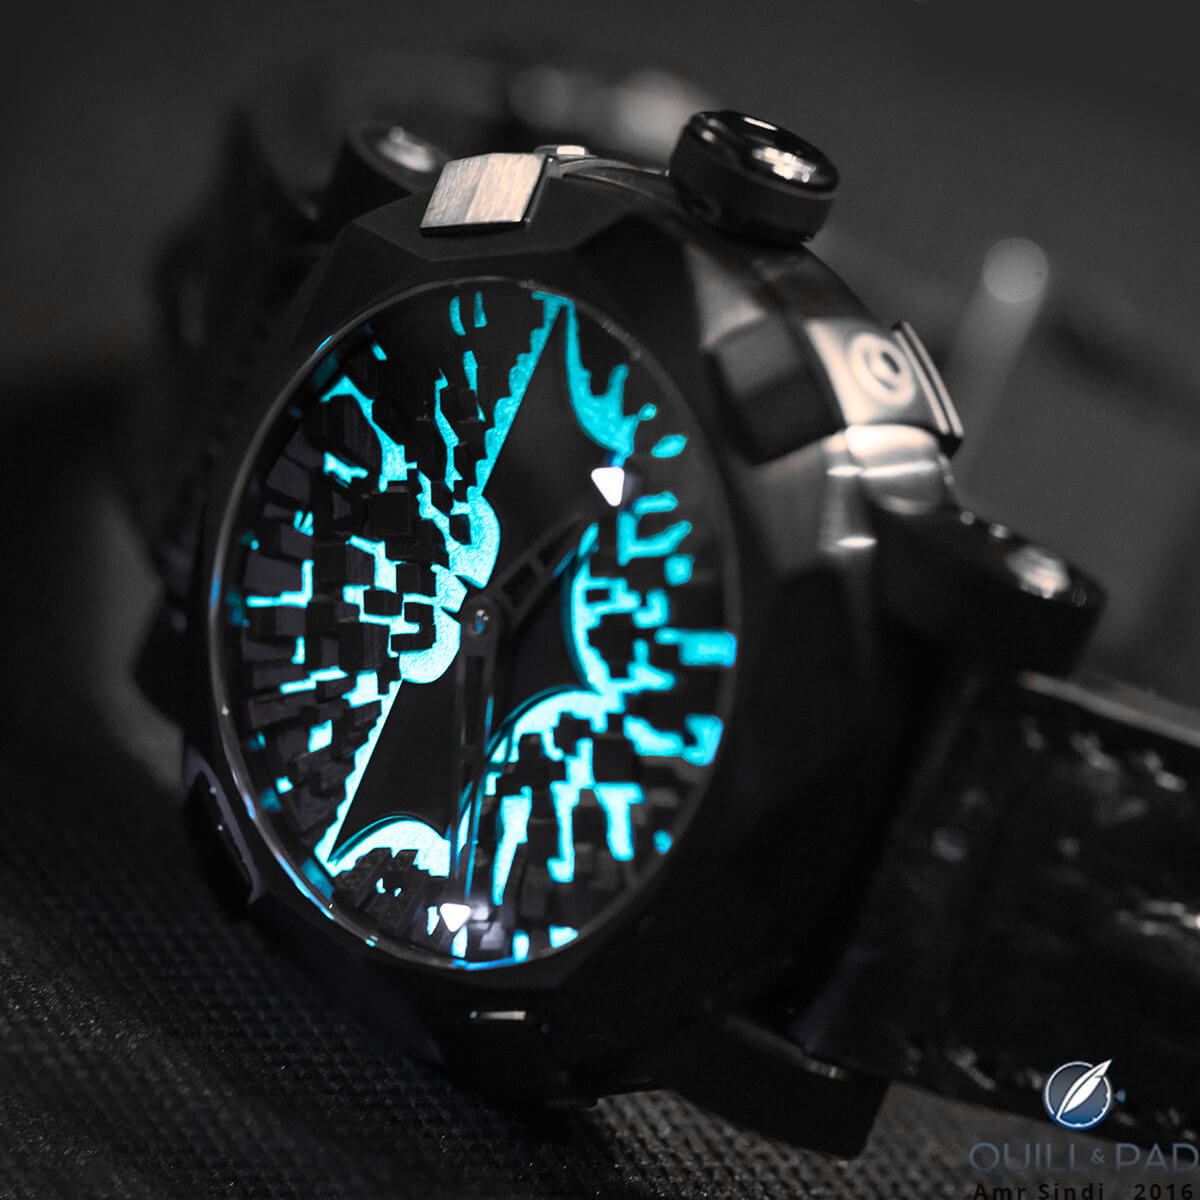 Romain Jerome's Batman DNA Gotham City lights up with lume by night